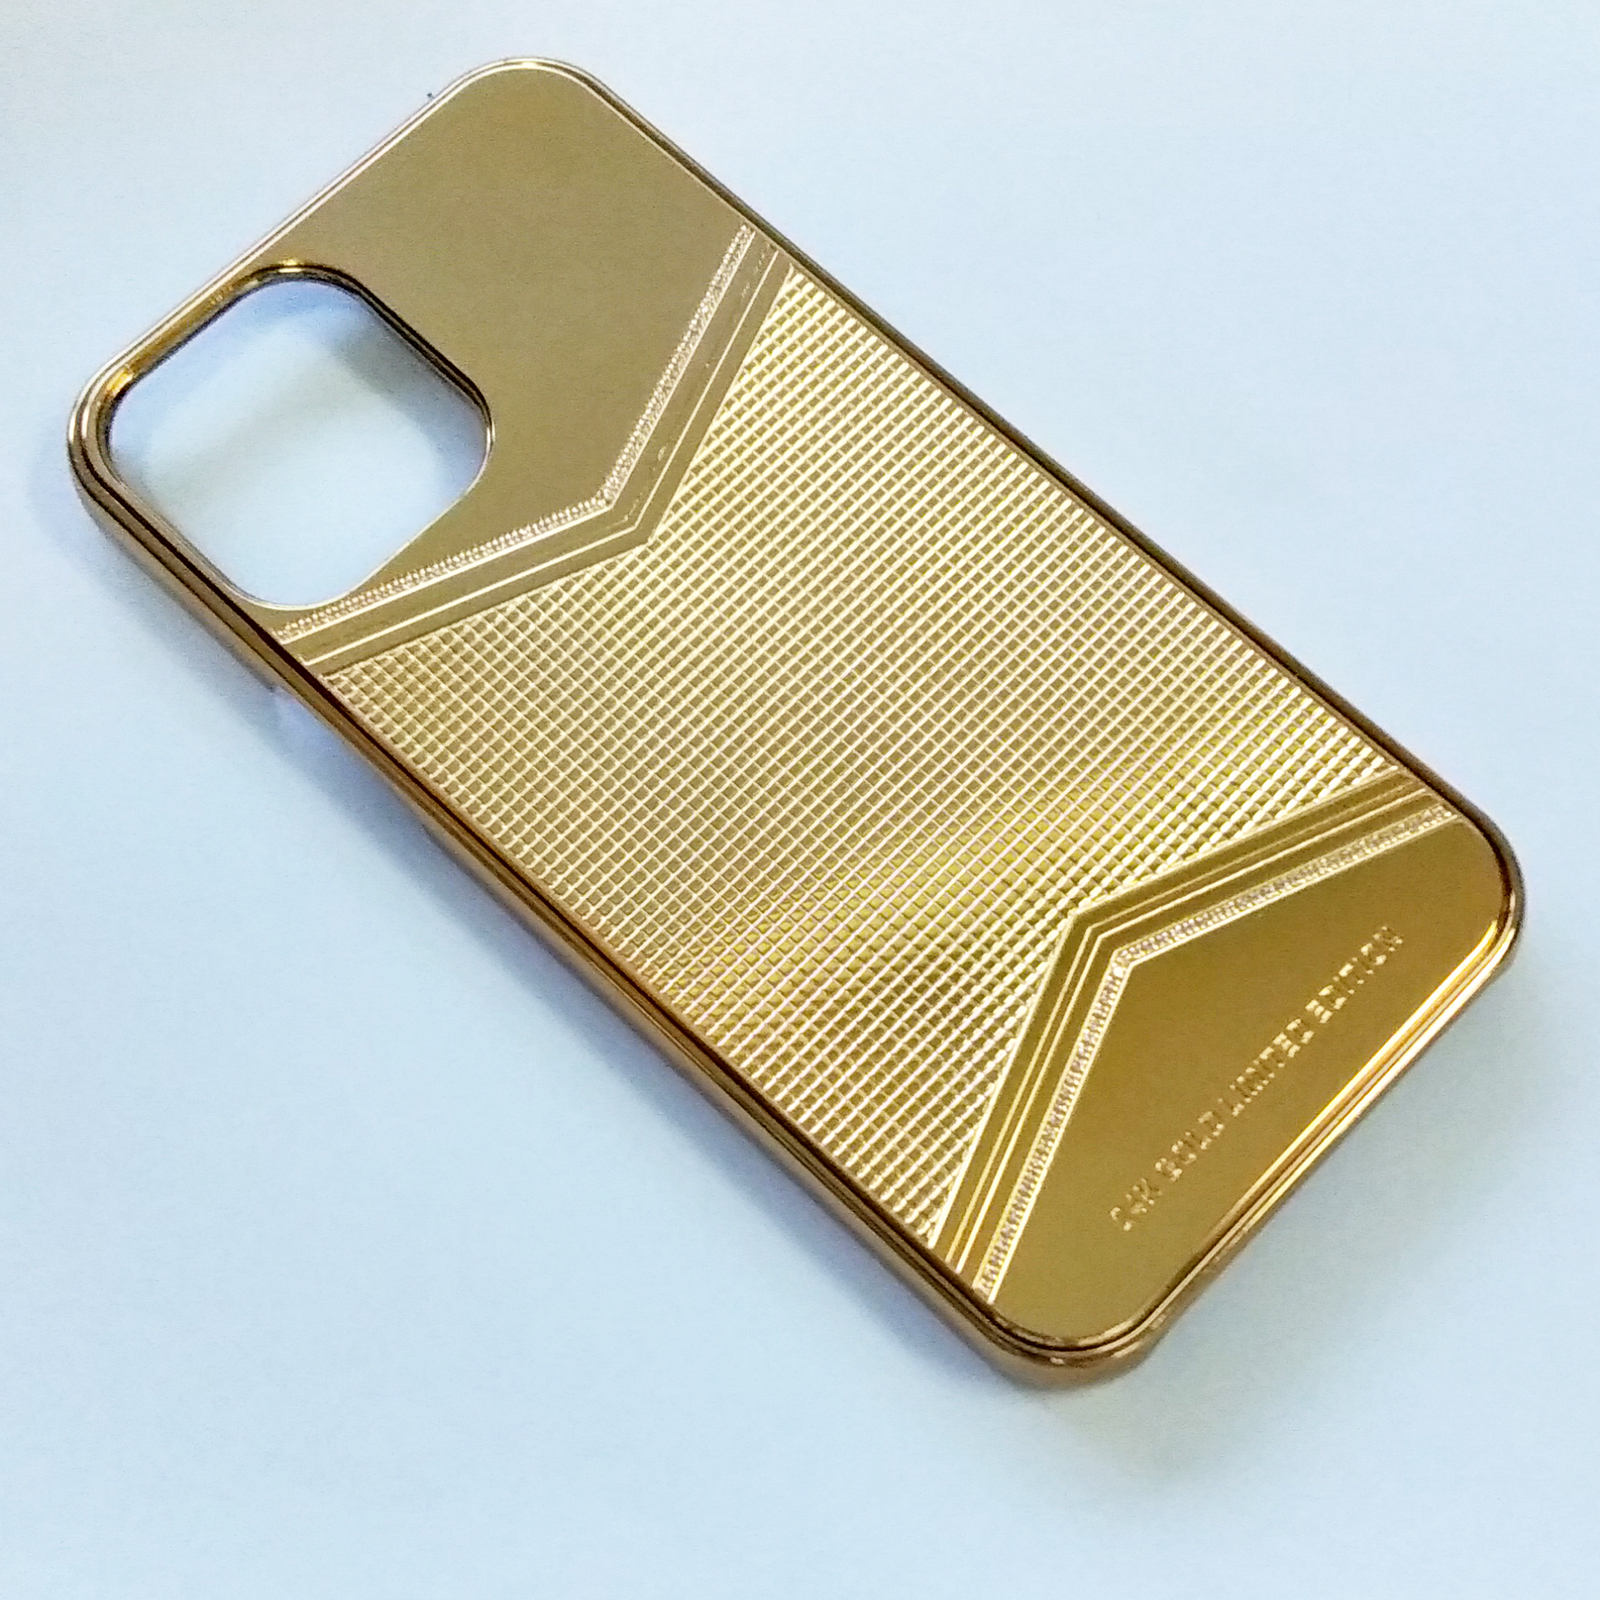 Phone Case Cover For Apple Iphone 12 Pro 12 Pro Max Customized Design 24k Gold Plated Iphone Protective Casecallancity Personalized Luxury Gift Phone Accessories Watch Accessories